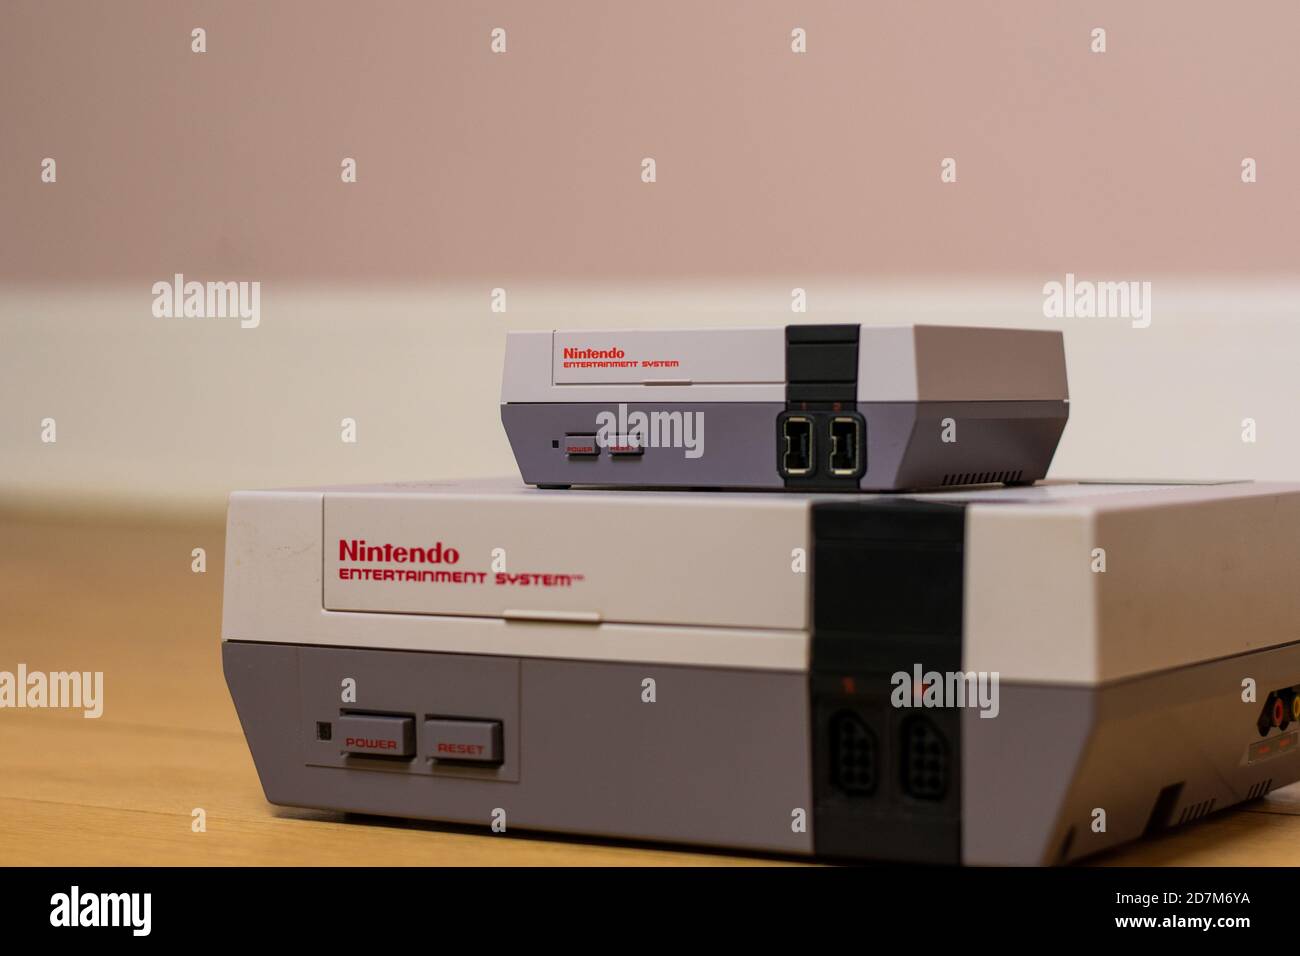 A Nintendo Entertainment System Classic Edition on Top of an Original Nintendo Entertainment System, on a wood floor. Comparison of the original NES a Stock Photo